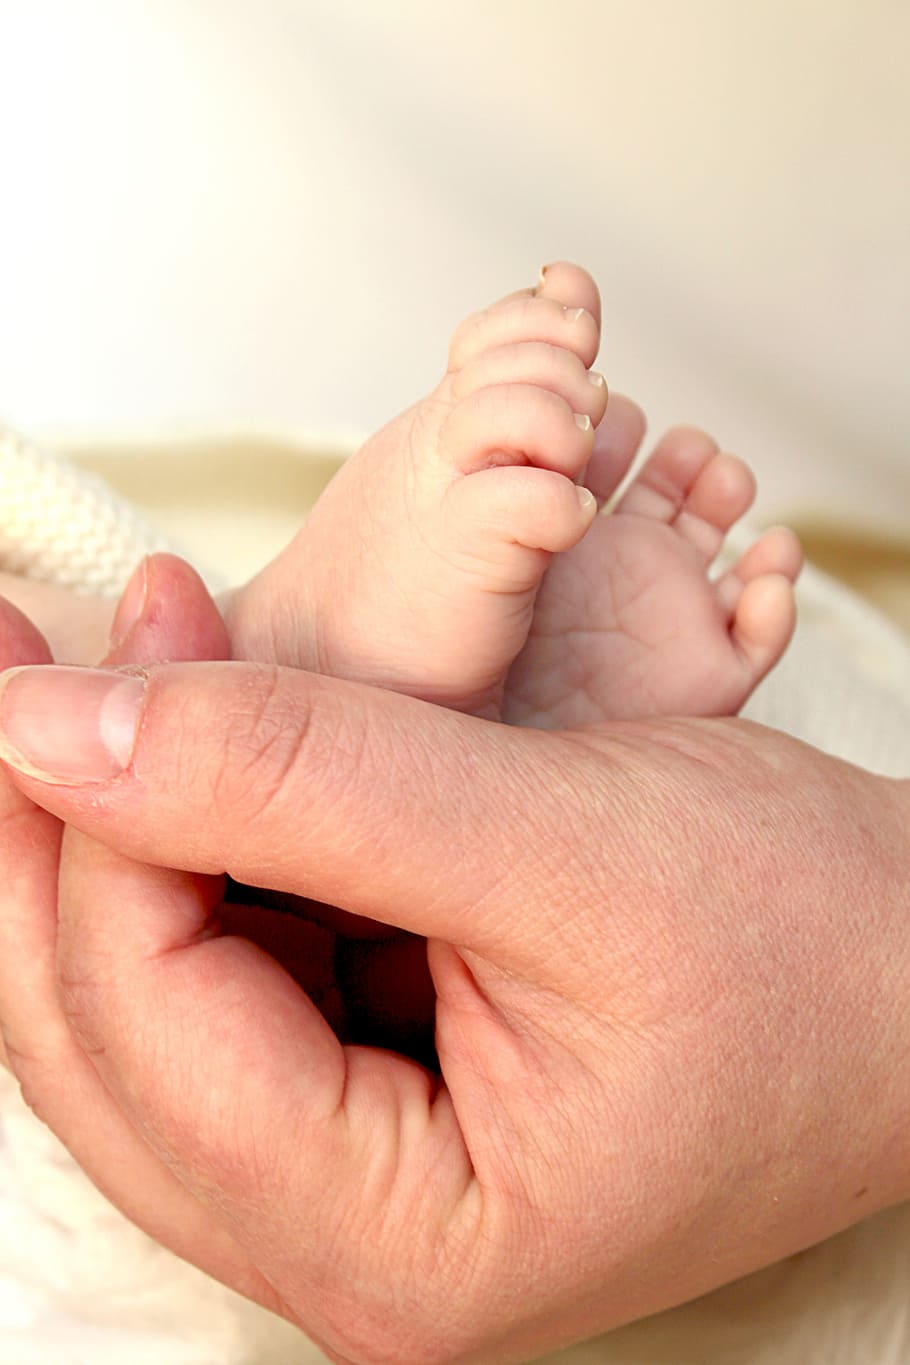 person, touching, baby, foot, feet, baby feet, child, small child, small, young